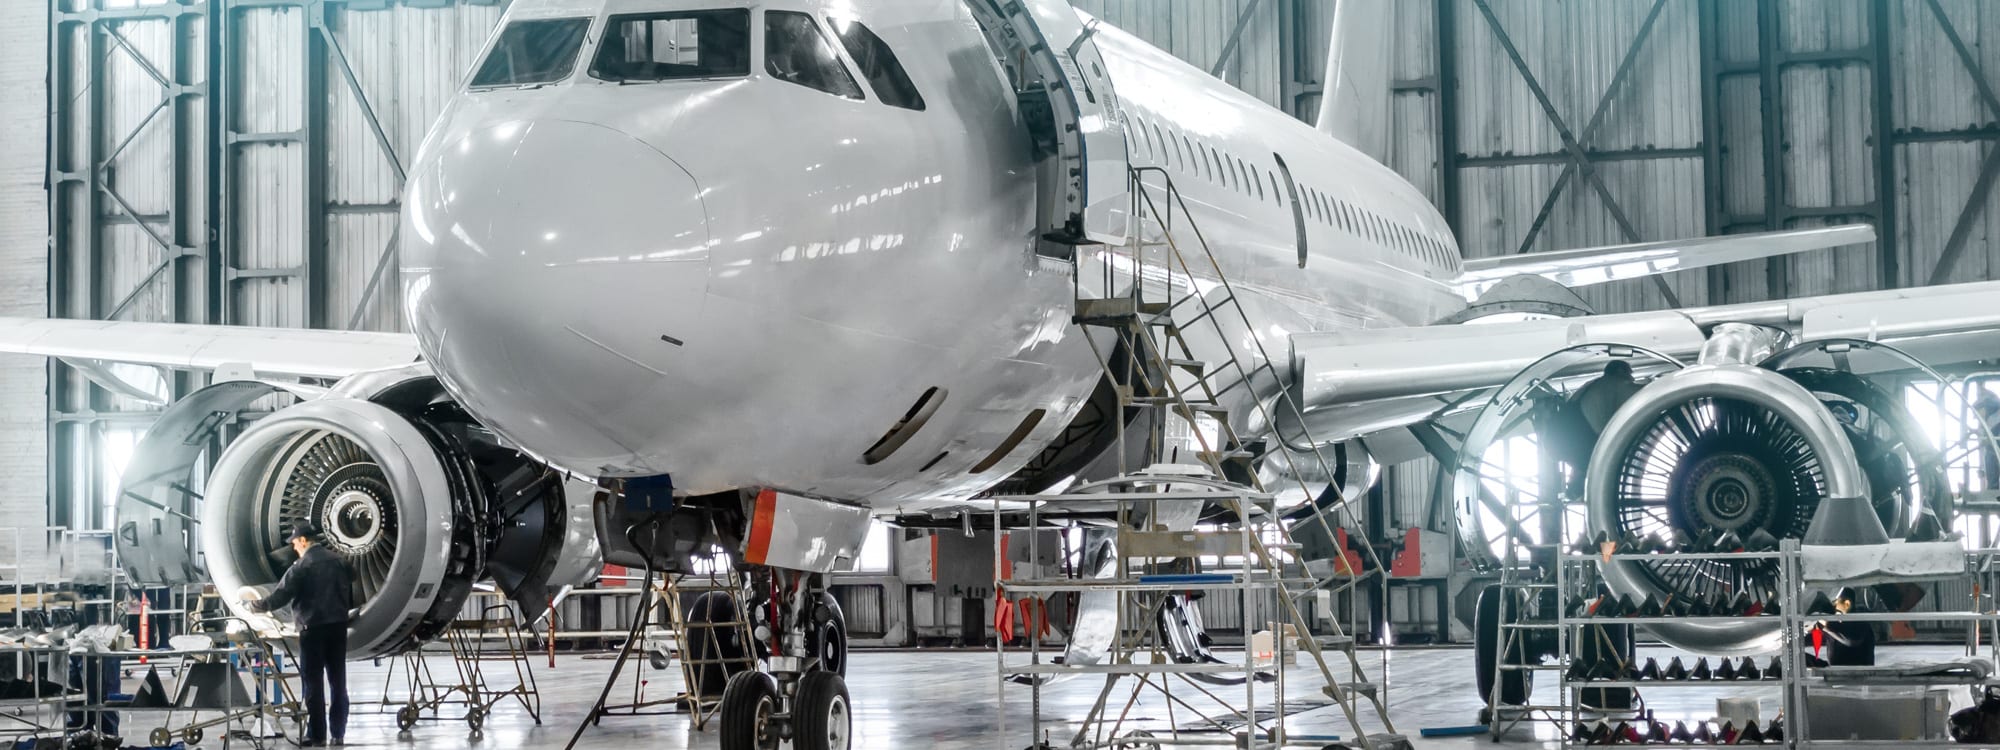 An aviation maintenance staff member considers what he recently learnt in the Southpacs Internal Auditors course while working on a plane.